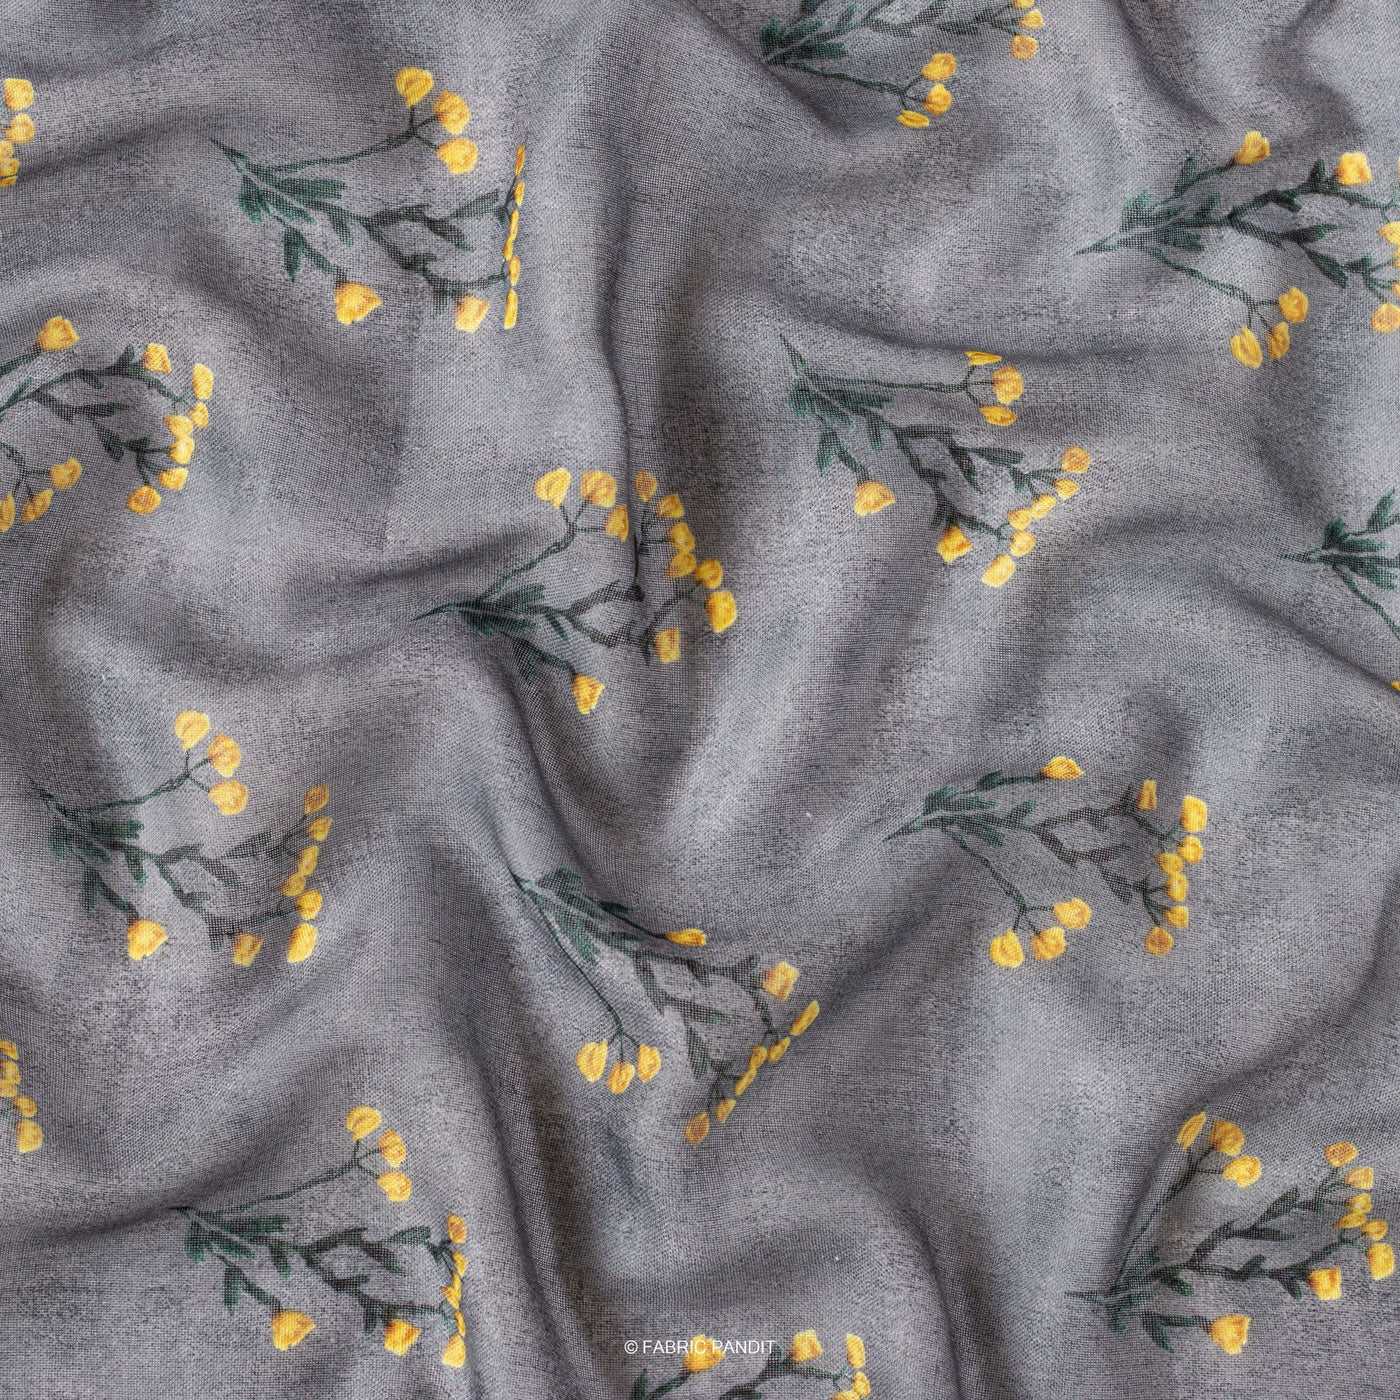 Fabric Pandit Cut Piece (Cut Piece) Dark Grey and Yellow Tulip Bunch Digital Printed Linen Neps Fabric (Width 44 Inches)